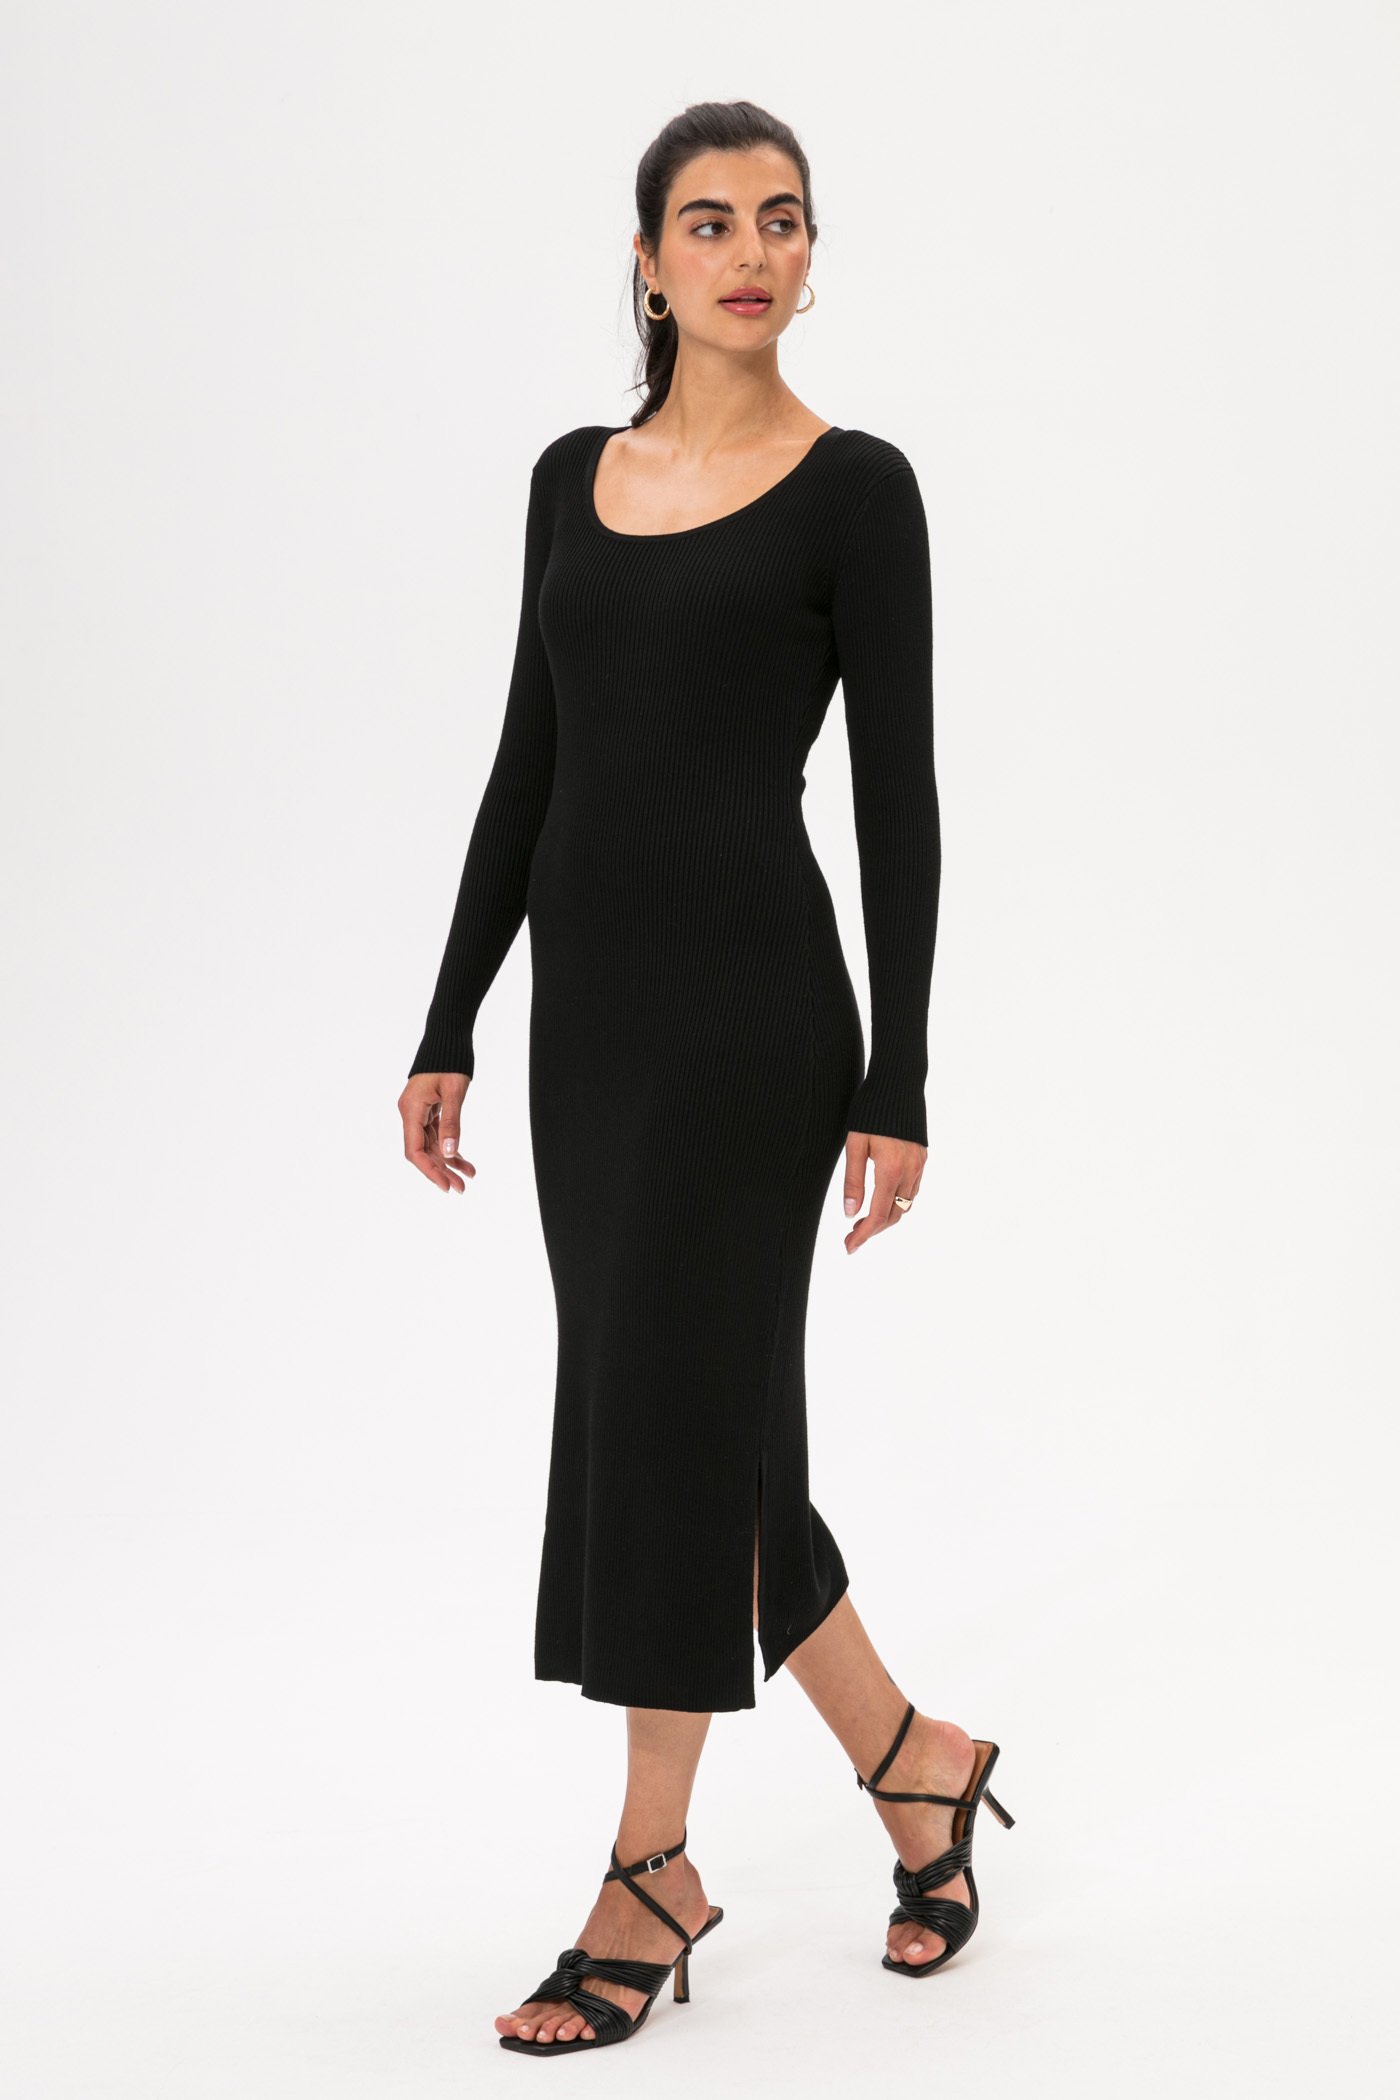 Black knitted dress Image 2